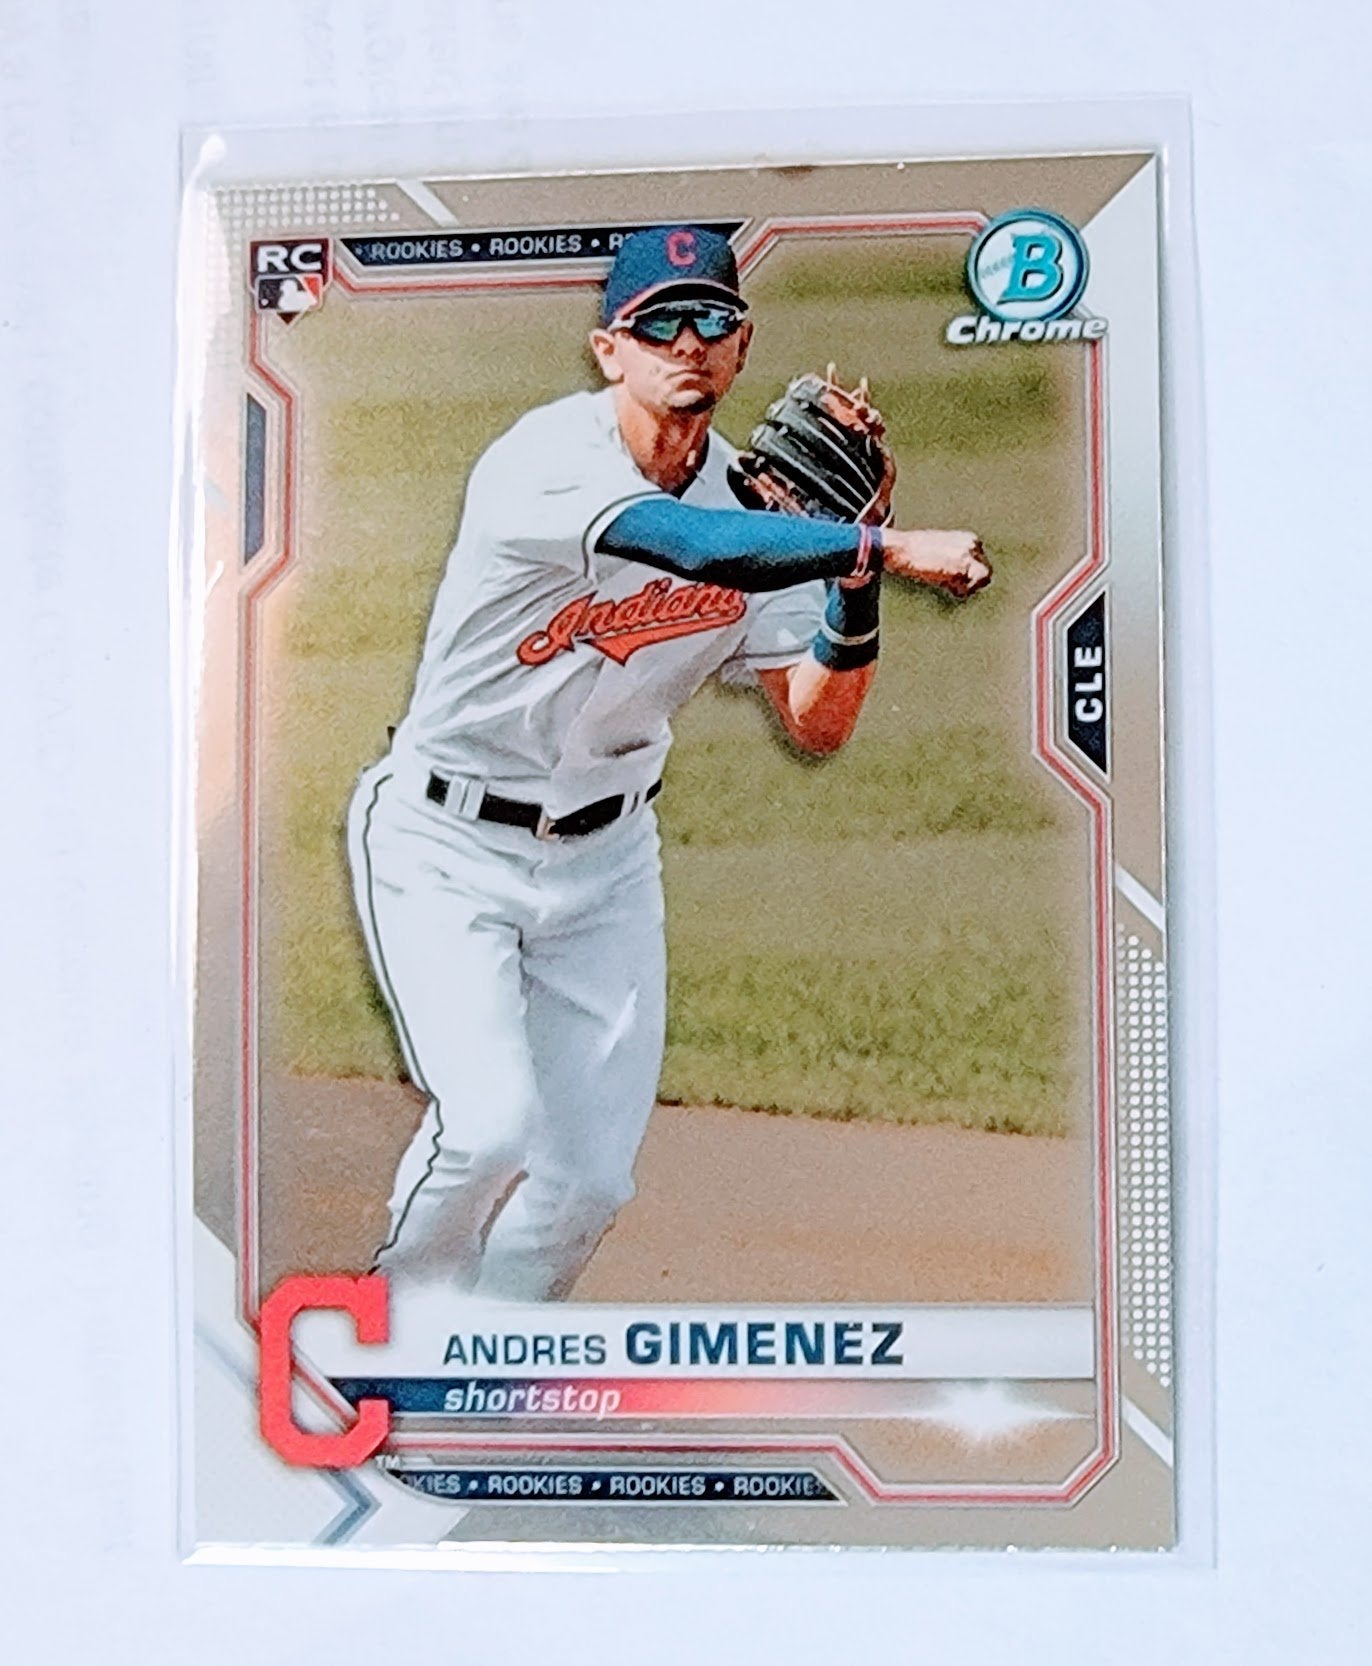 2021 Bowman Chrome Andres Giminez Rookie Baseball Trading Card SMCB1 simple Xclusive Collectibles   